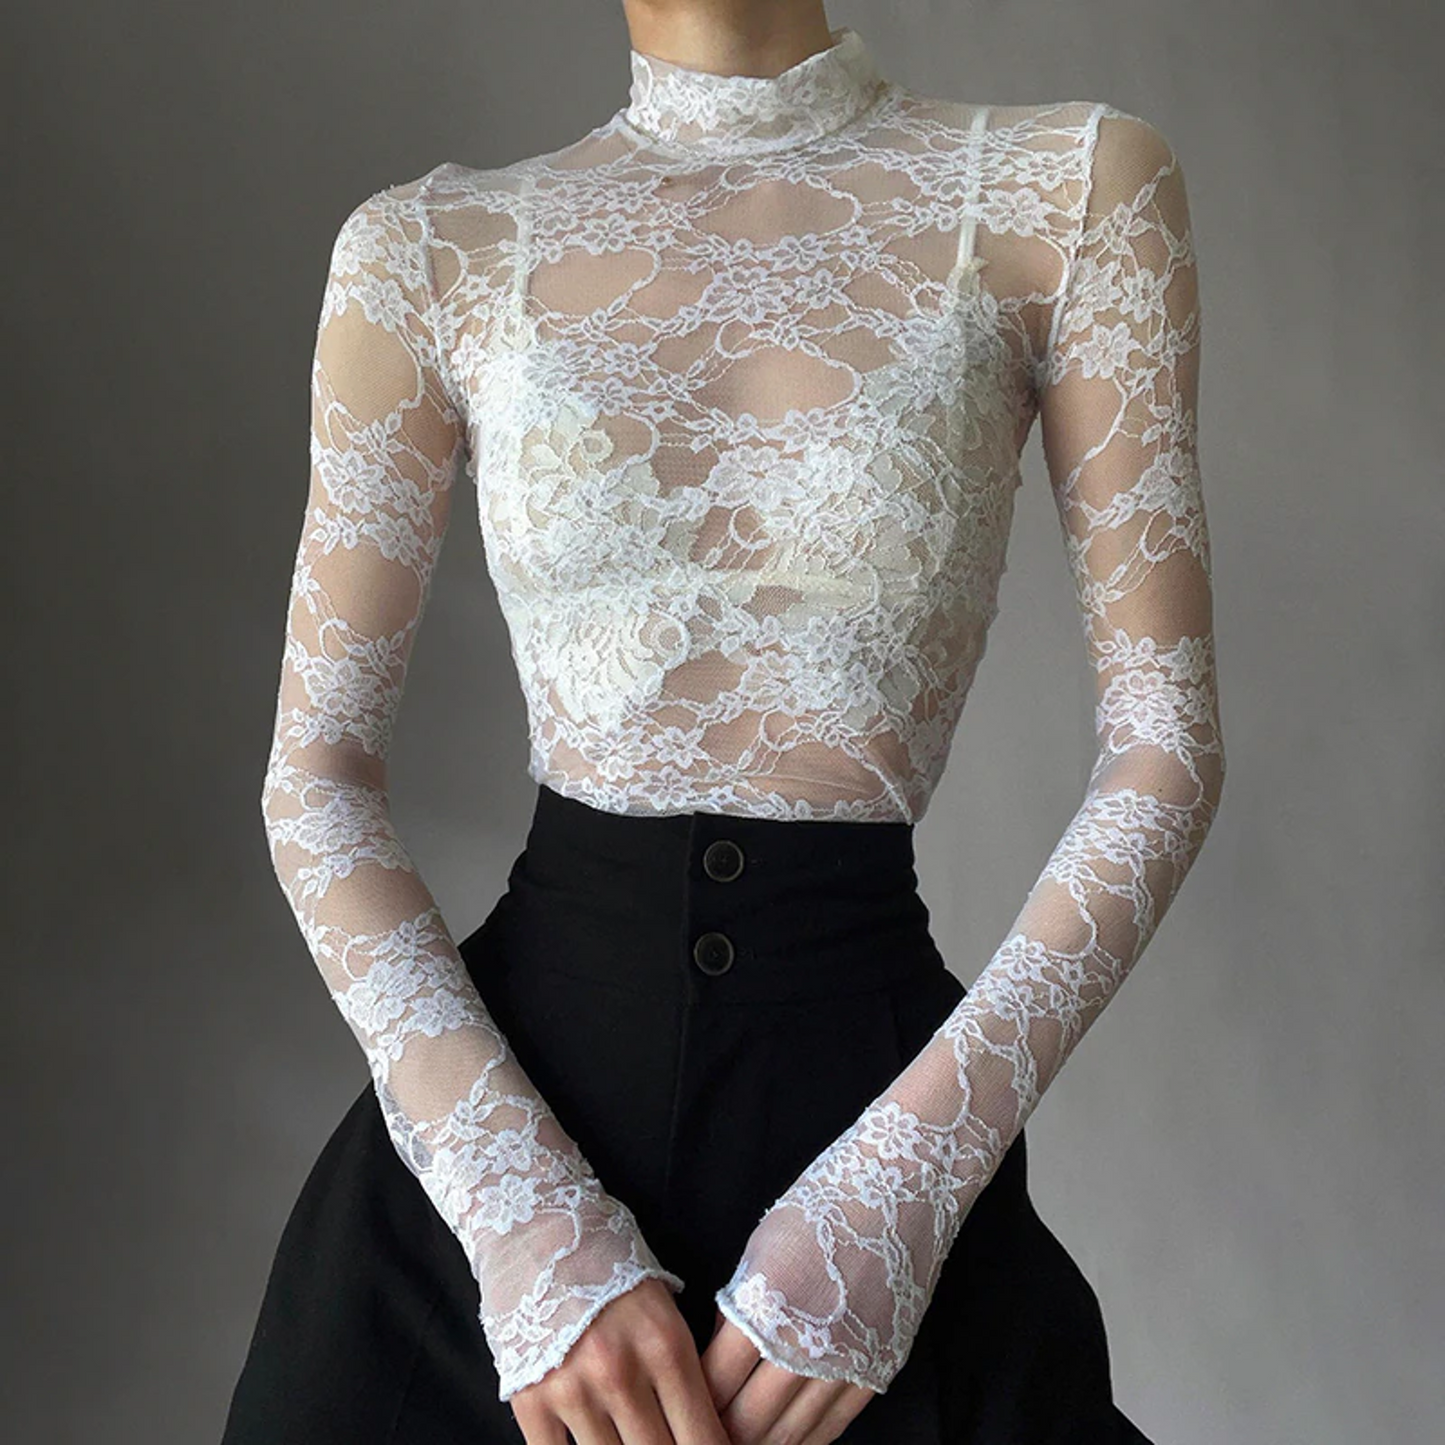 Turtleneck See Through Lace Blouse